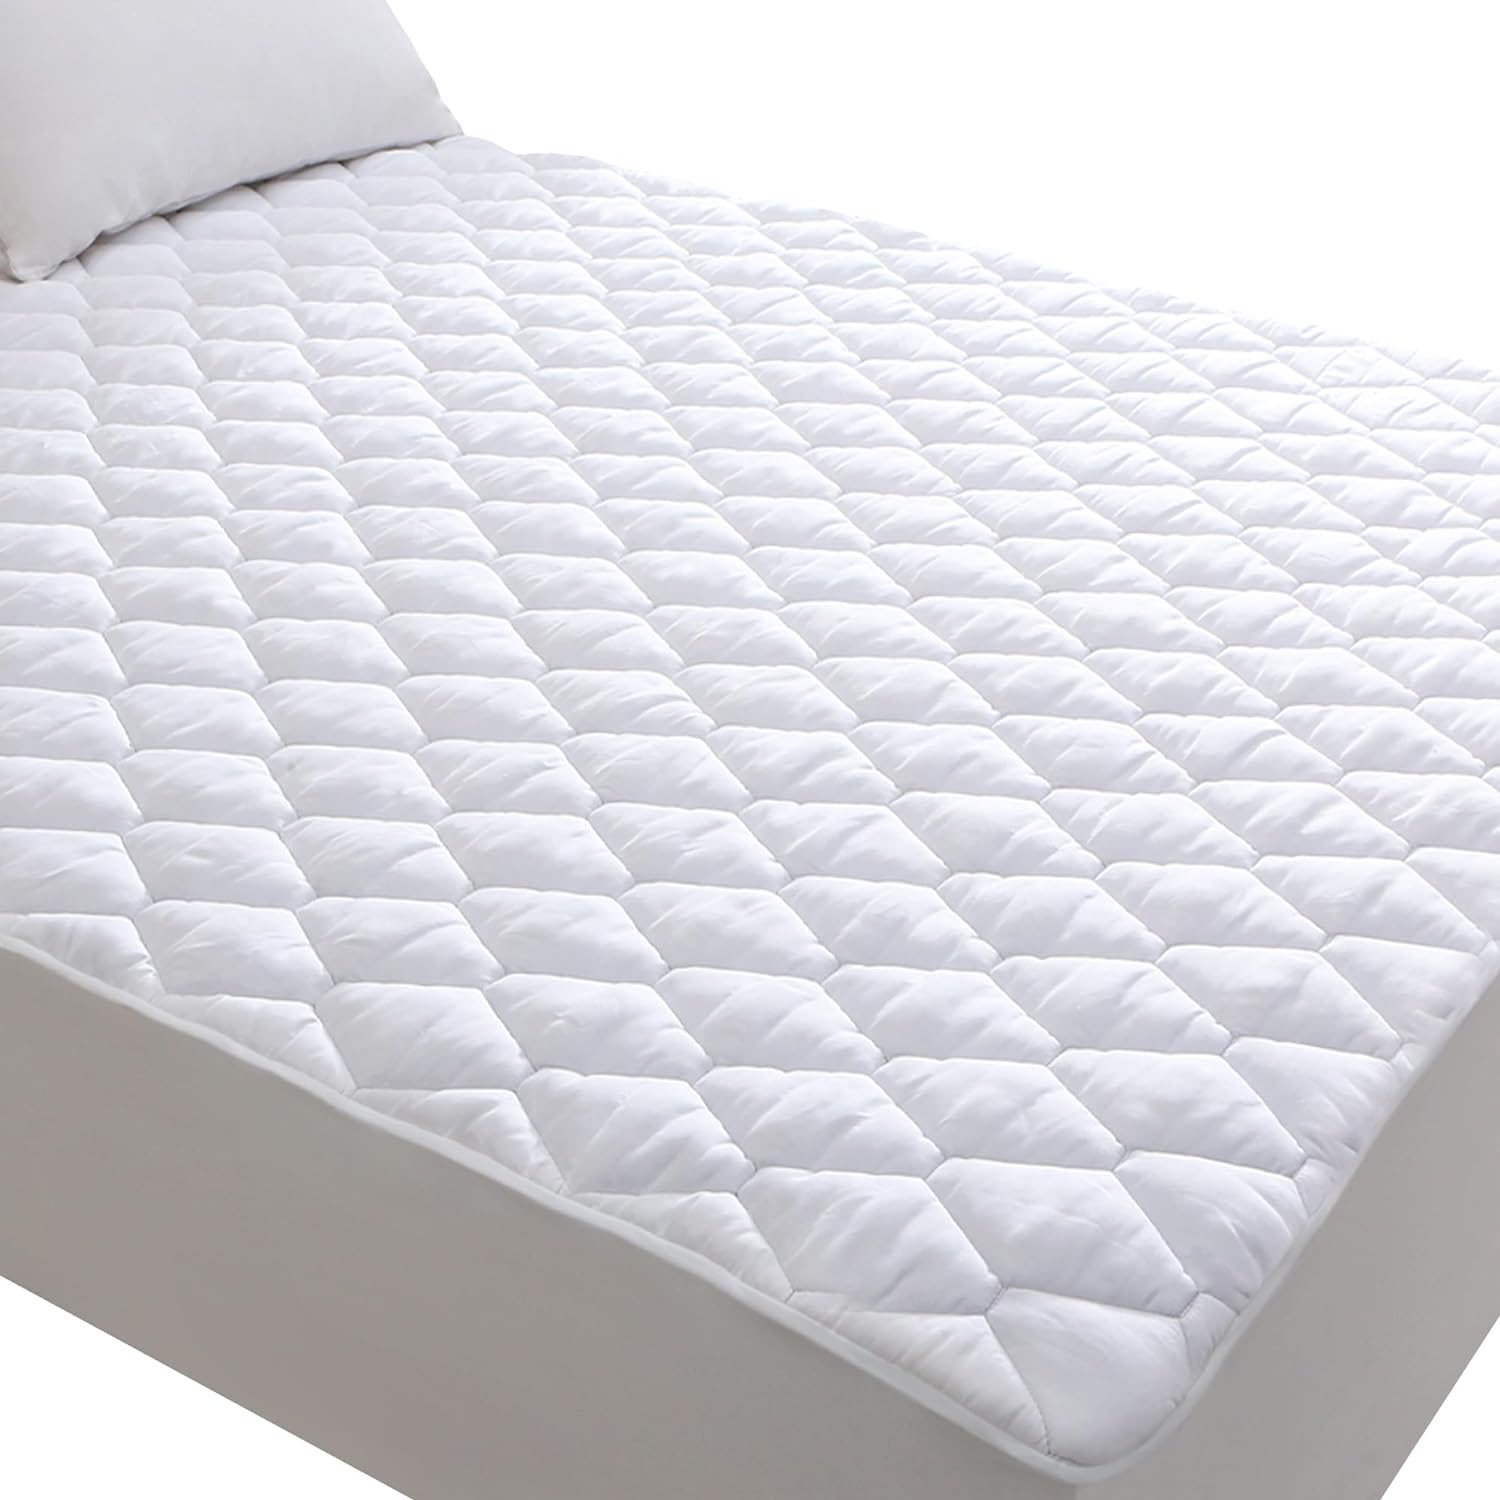 Lunsing Waterproof Mattress Protector. 8592 units.  EXW Los Angeles $12.75 unit.